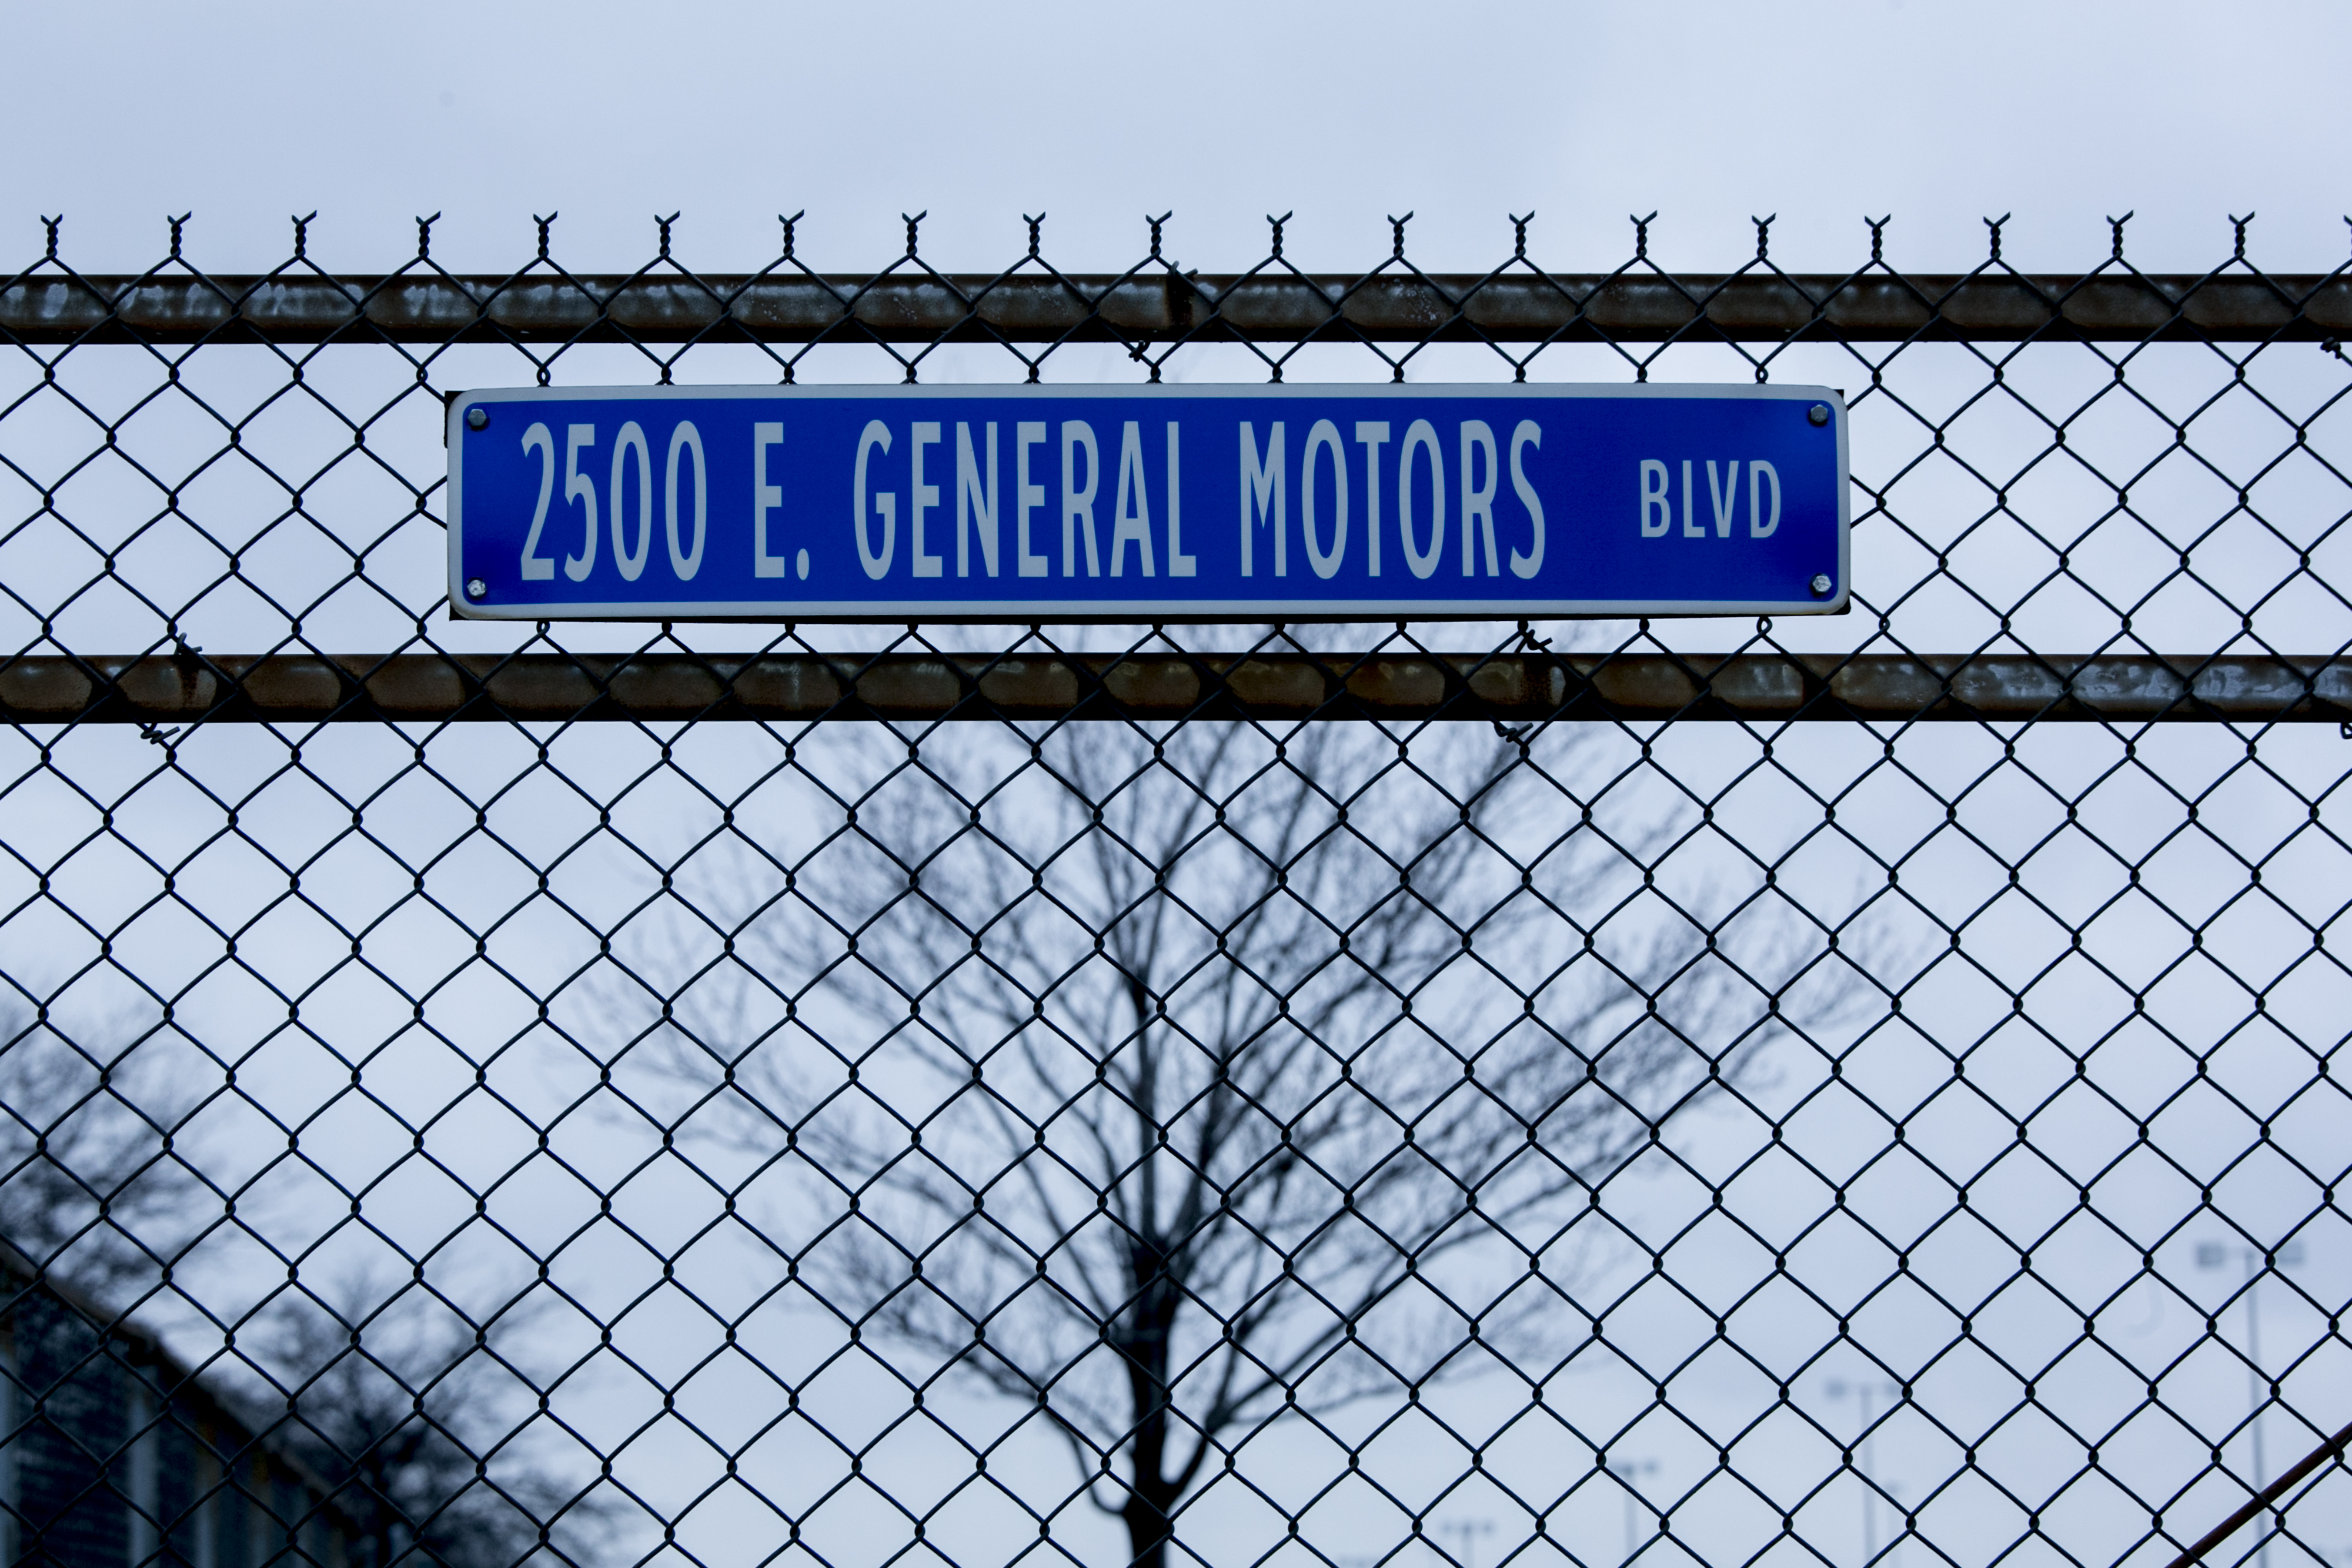 A road sign for East General Motors Boulevard hangs outside the General Motors Co. Detroit-Hamtramck assembly plant in Detroit, Michigan, U.S., on Monday, Nov. 26, 2018. General Motors Co. will cut more than 14,000 salaried staff and factory workers and close seven factories worldwide by the end of next year, part of a sweeping realignment to prepare for a future of electric and self-driving vehicles. Photographer: Anthony Lanzilote/Bloomberg